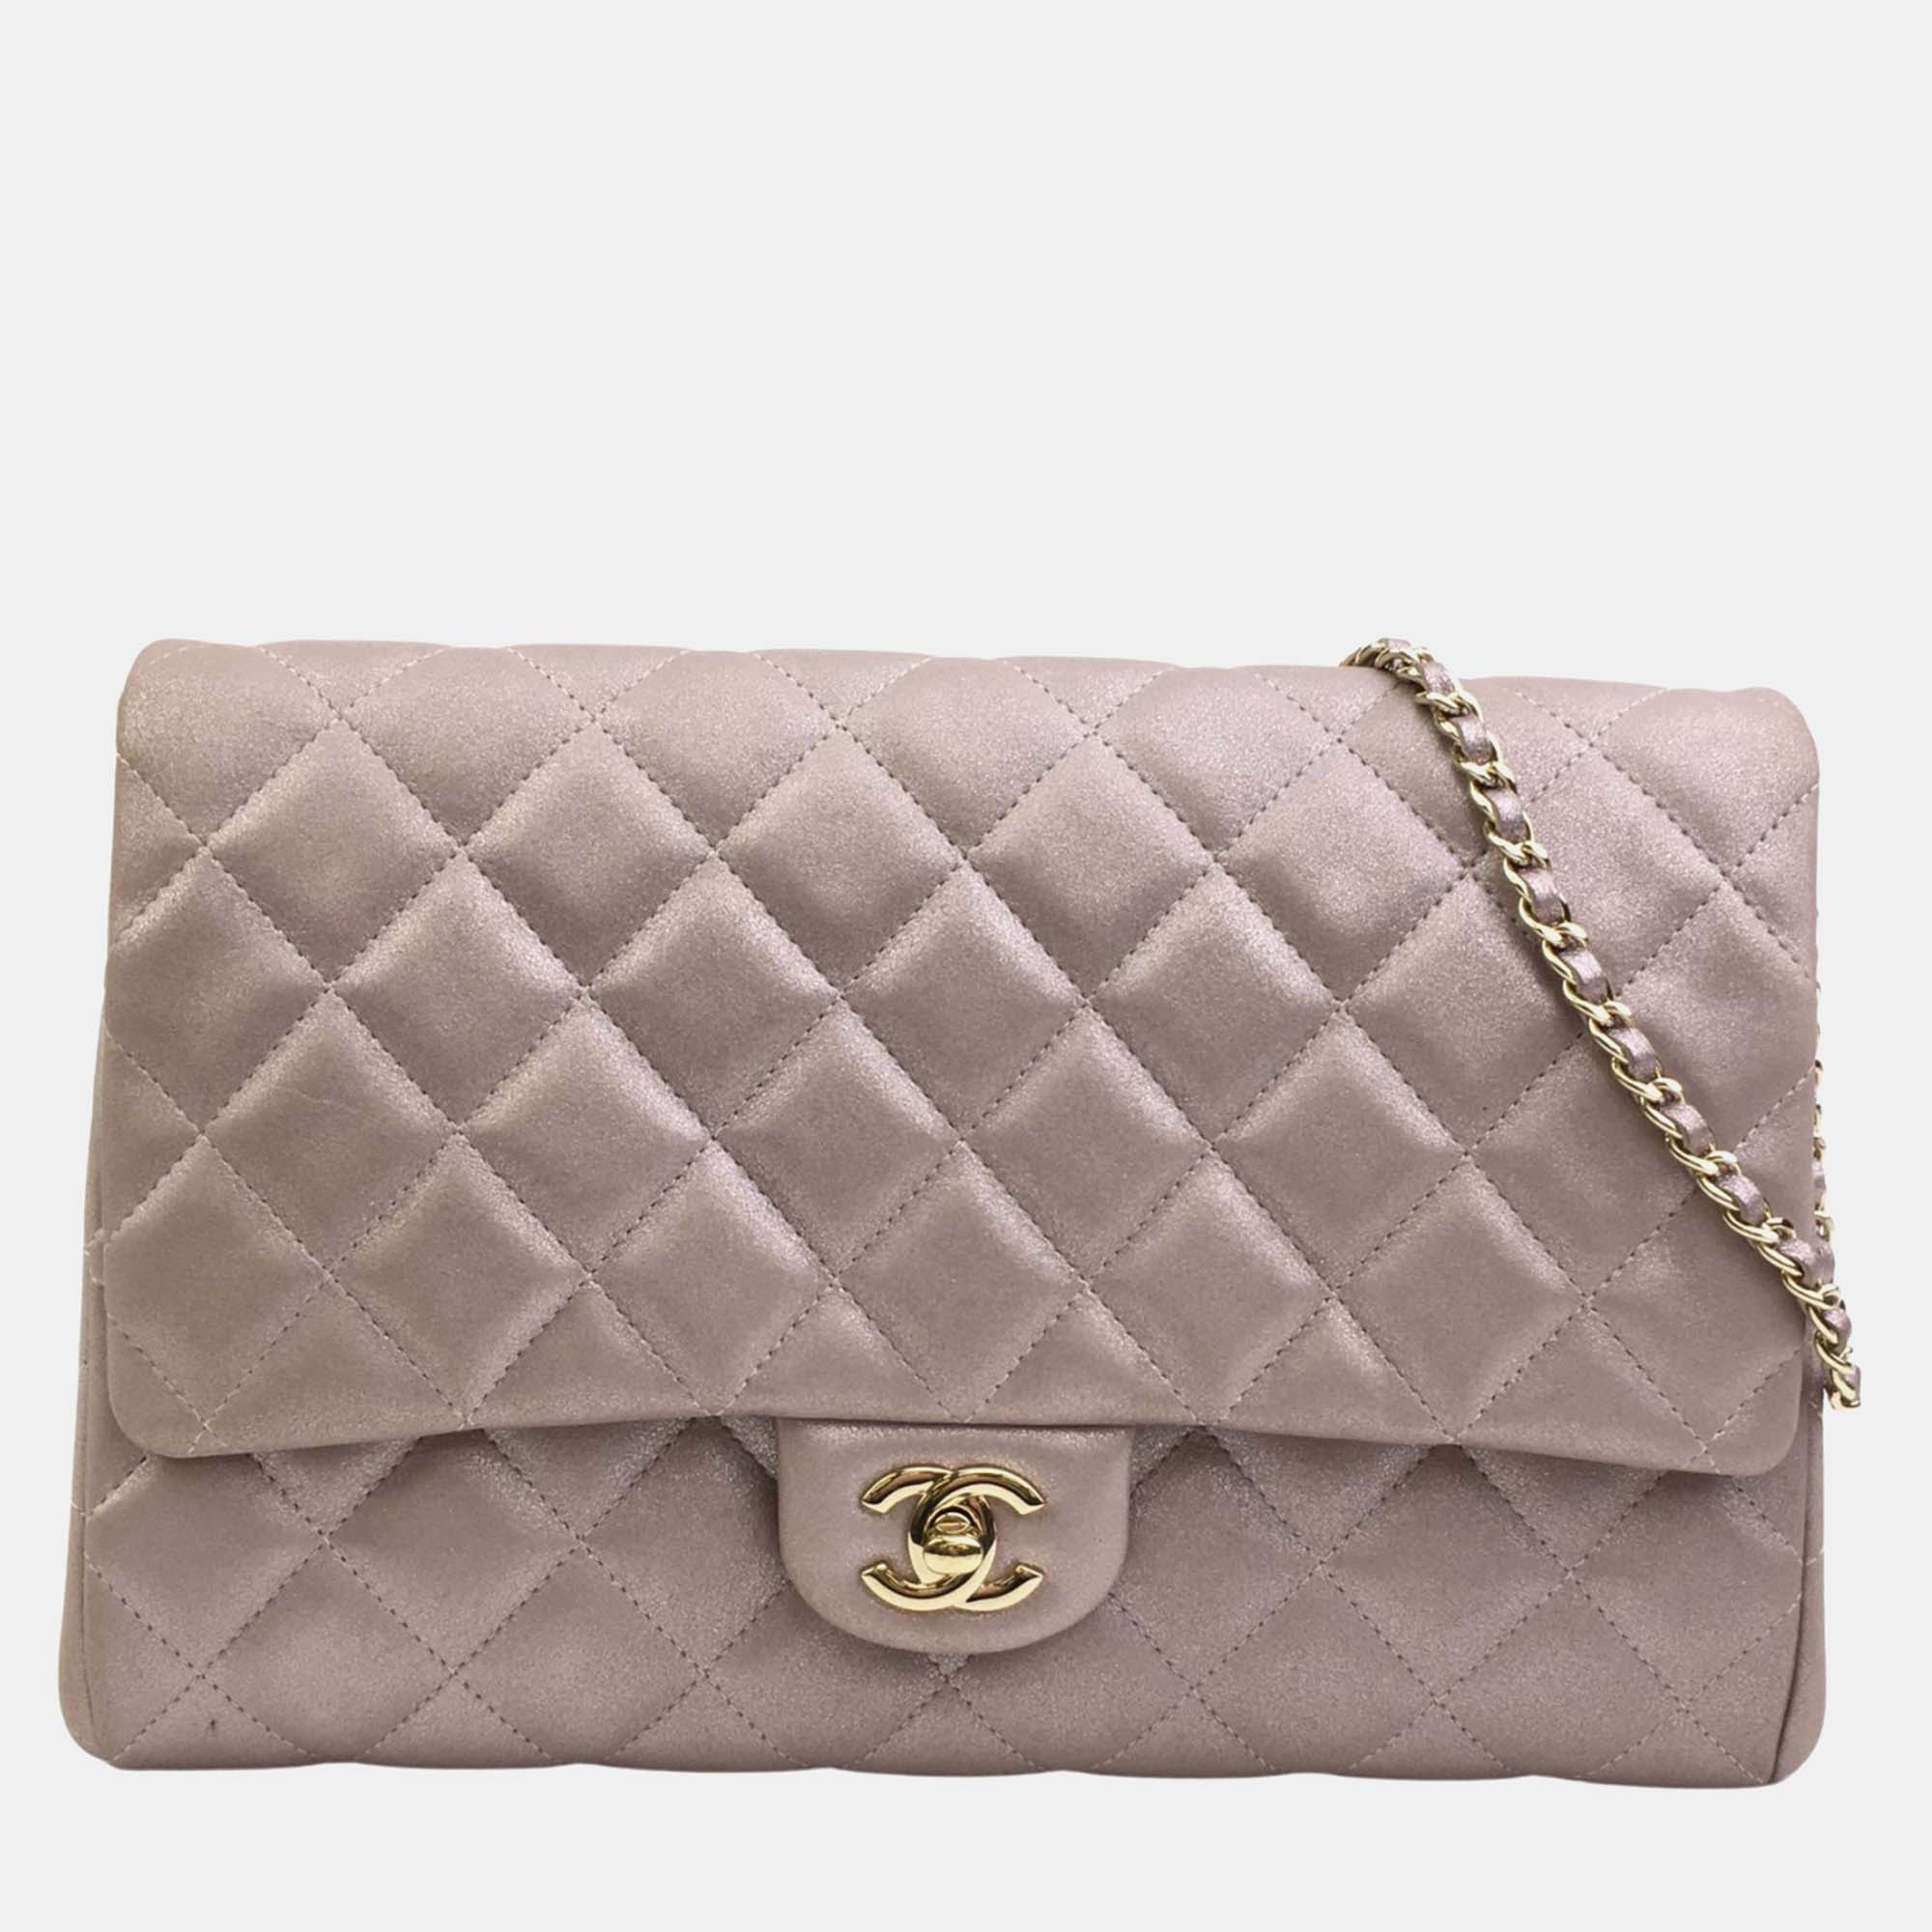 Chanel iridescent pink leather classic clutch on chain